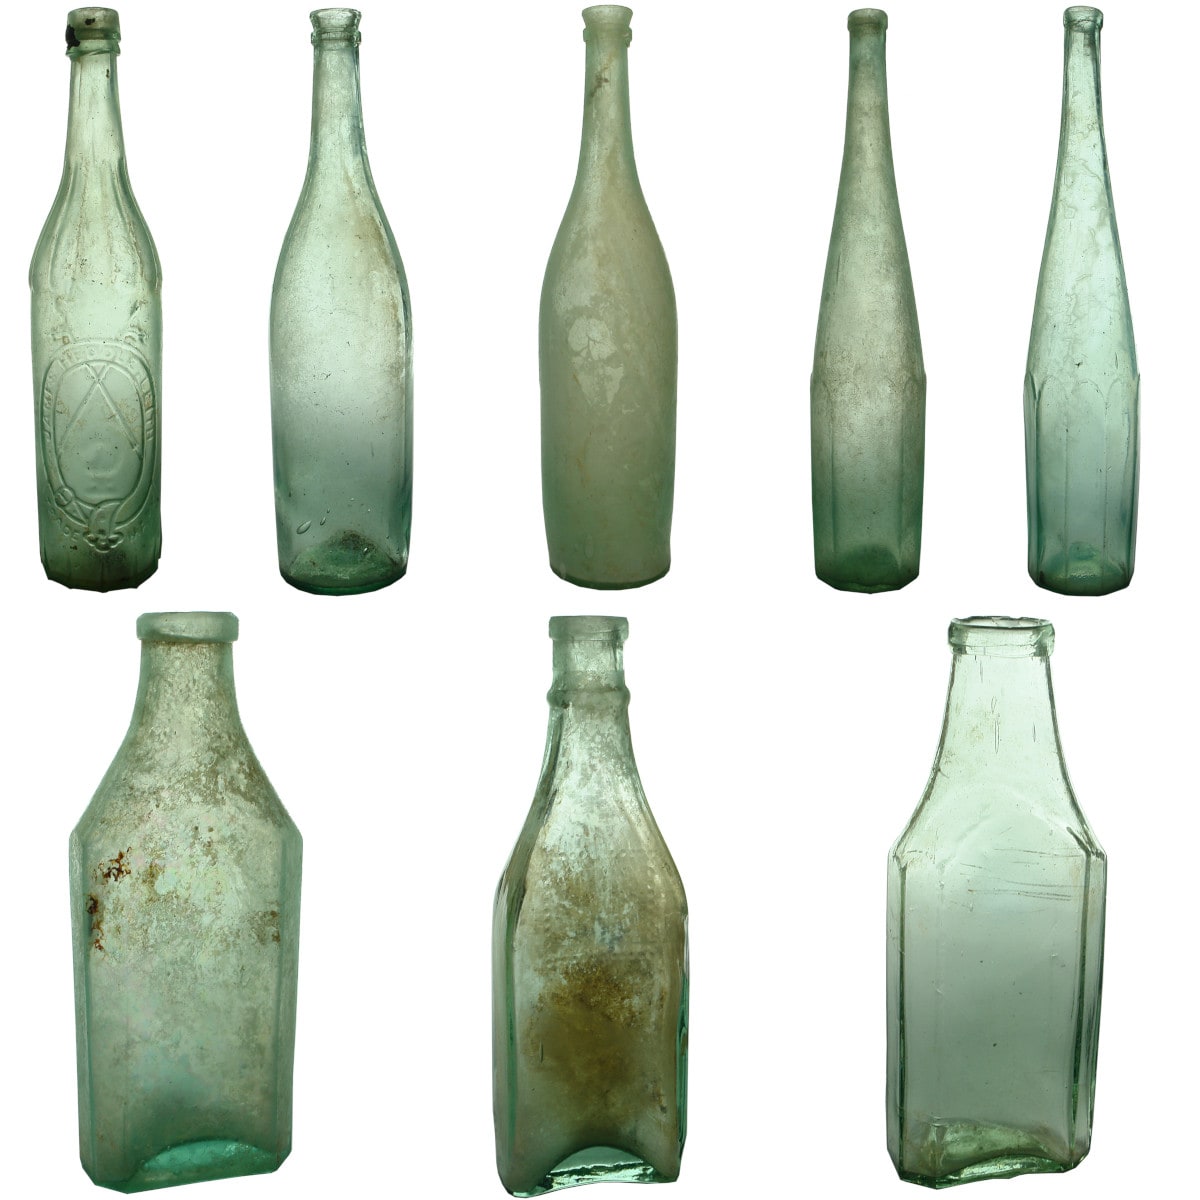 8 Goldfields type bottles: Heddle Leith; 4 early vinegars; 3 Mustard sauce or chutney types.